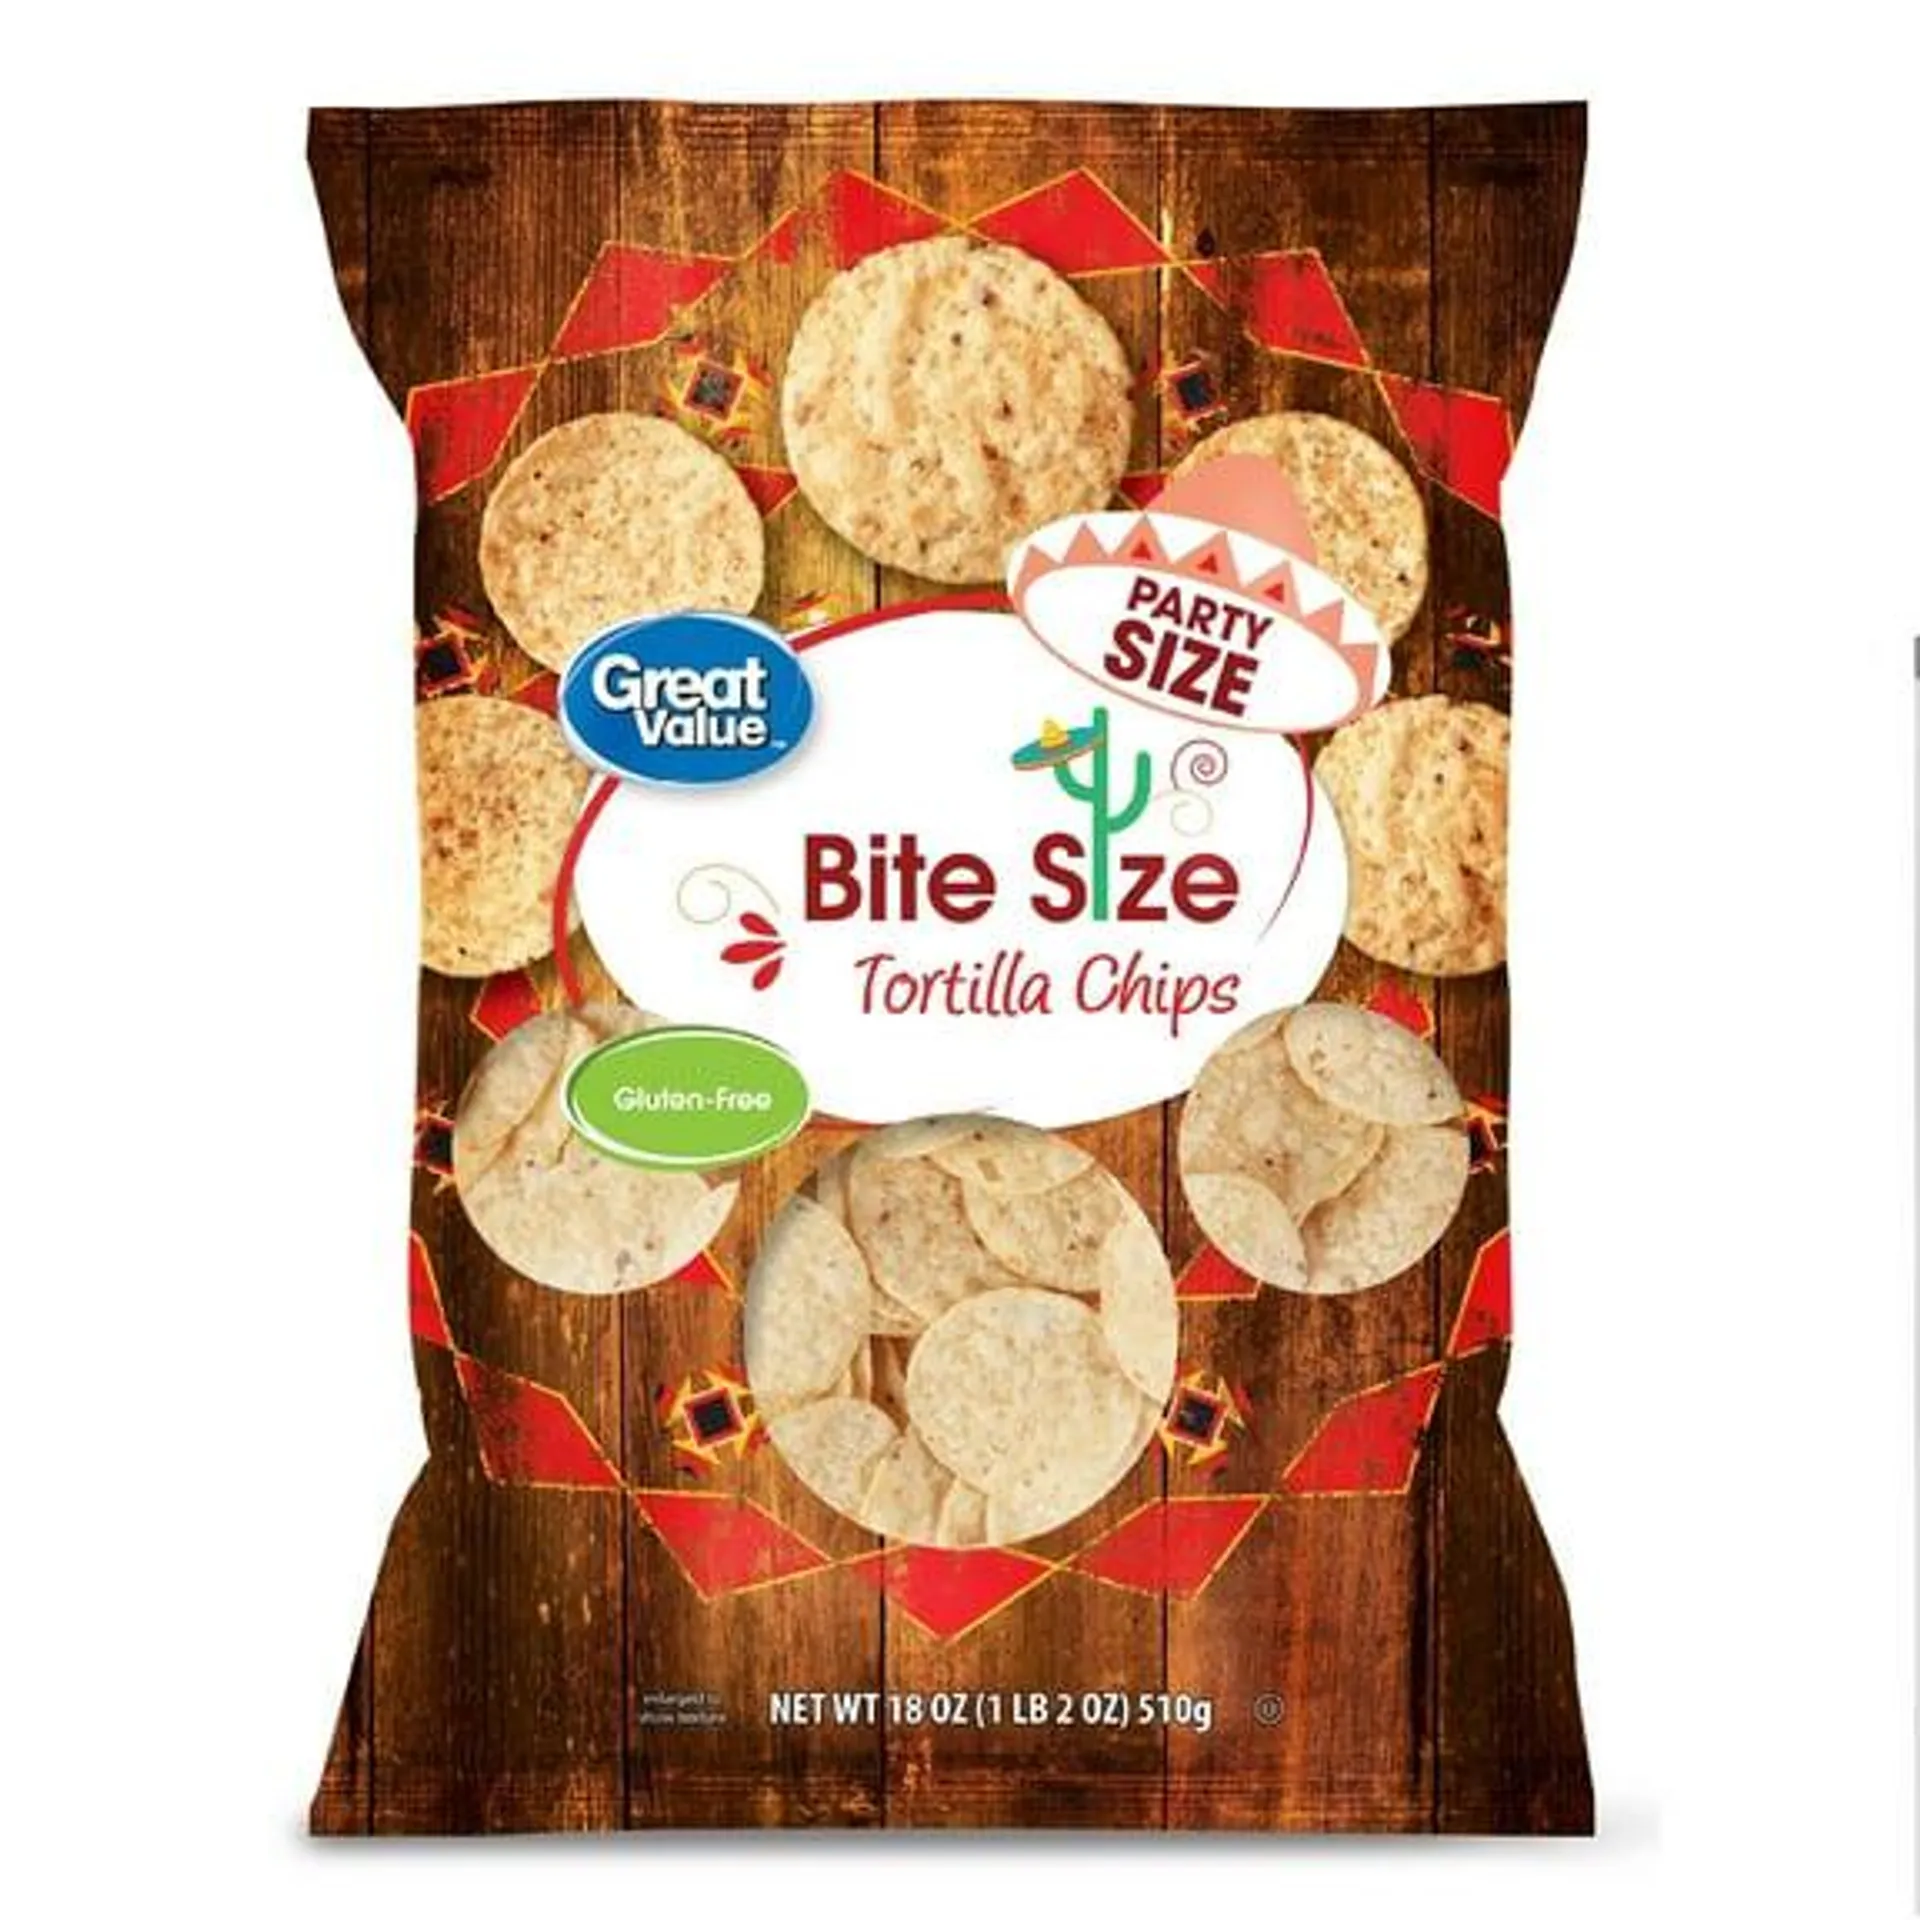 Great Value Bite Size Tortilla Chips Party Size, 18 oz